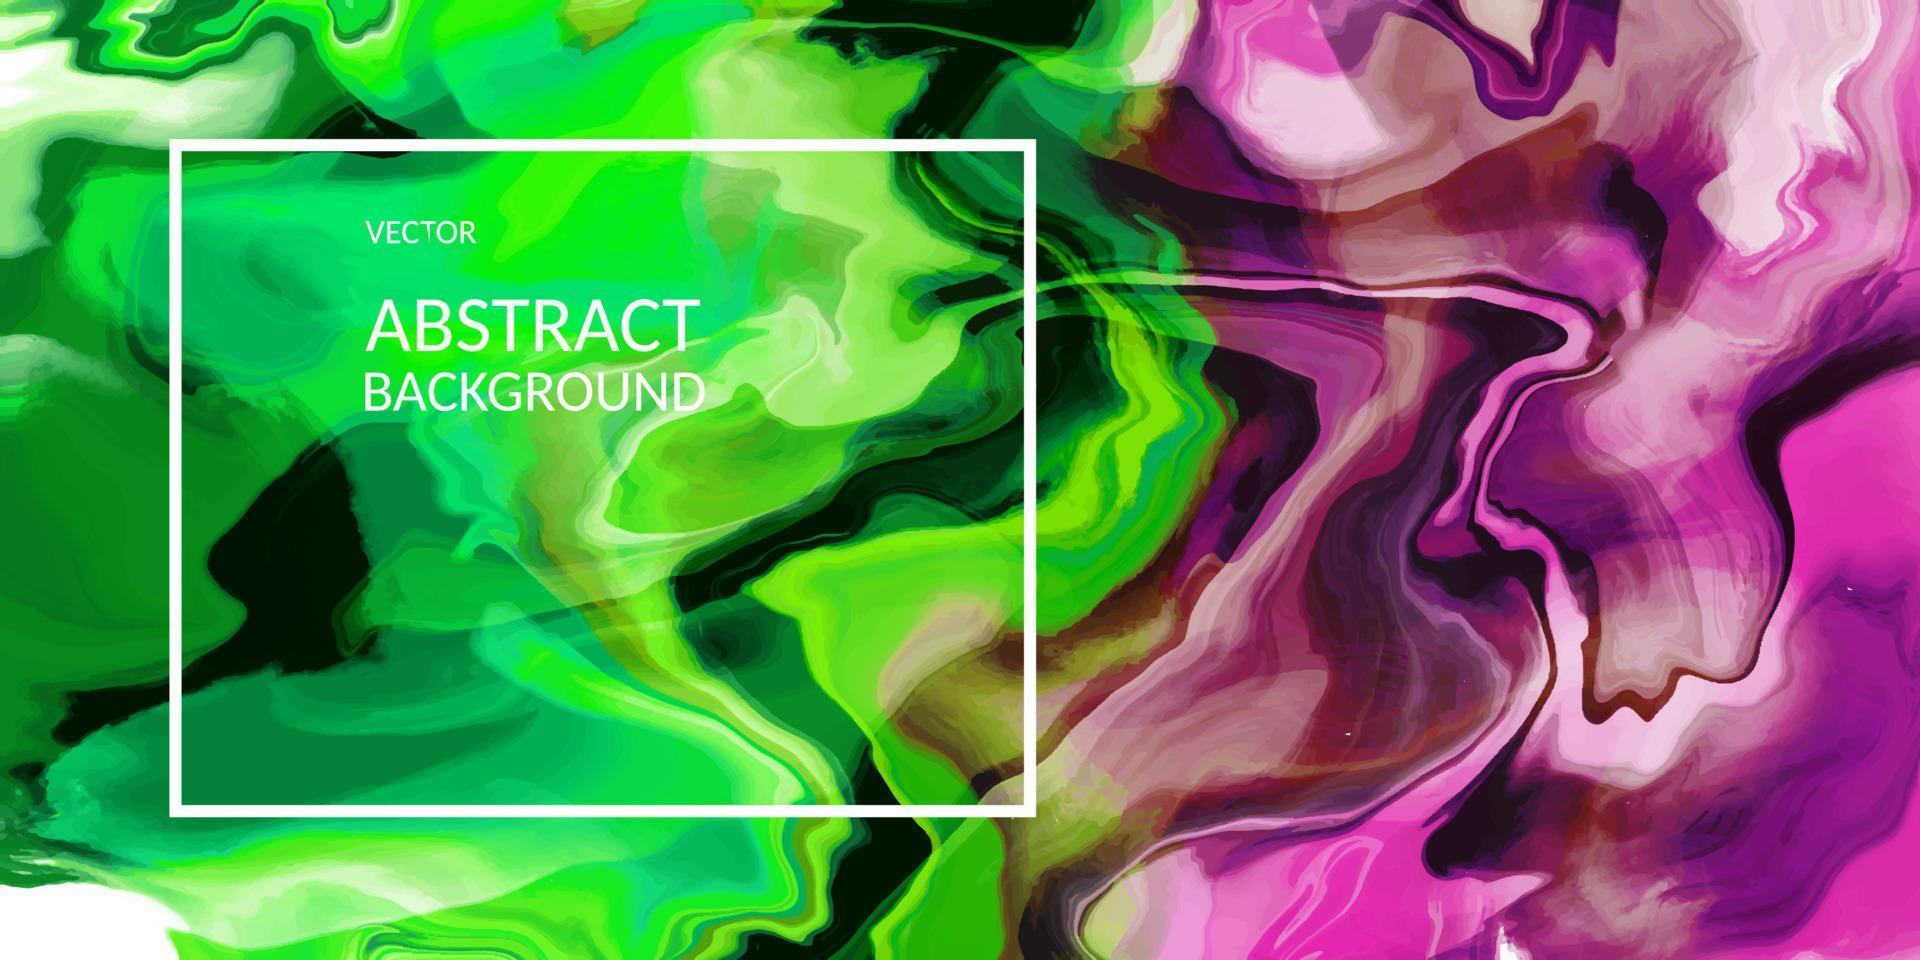 Abstract  marble texture,   Fluid design  background green and pink color vector